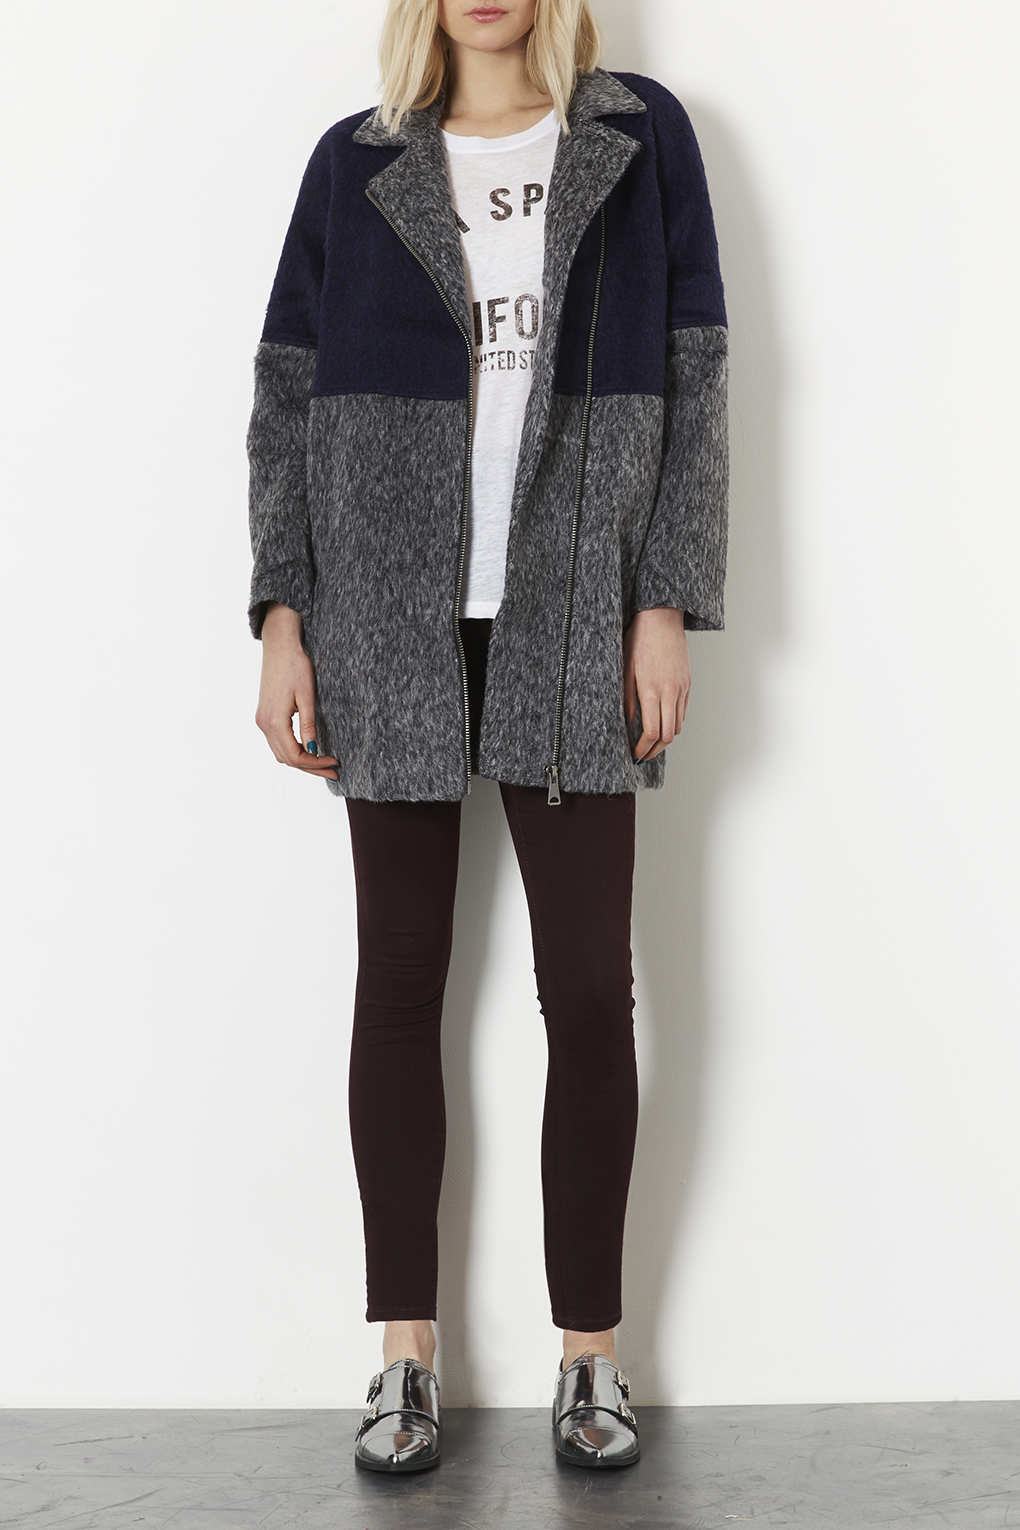 Lyst - Topshop Colour Block Wool Jacket in Gray